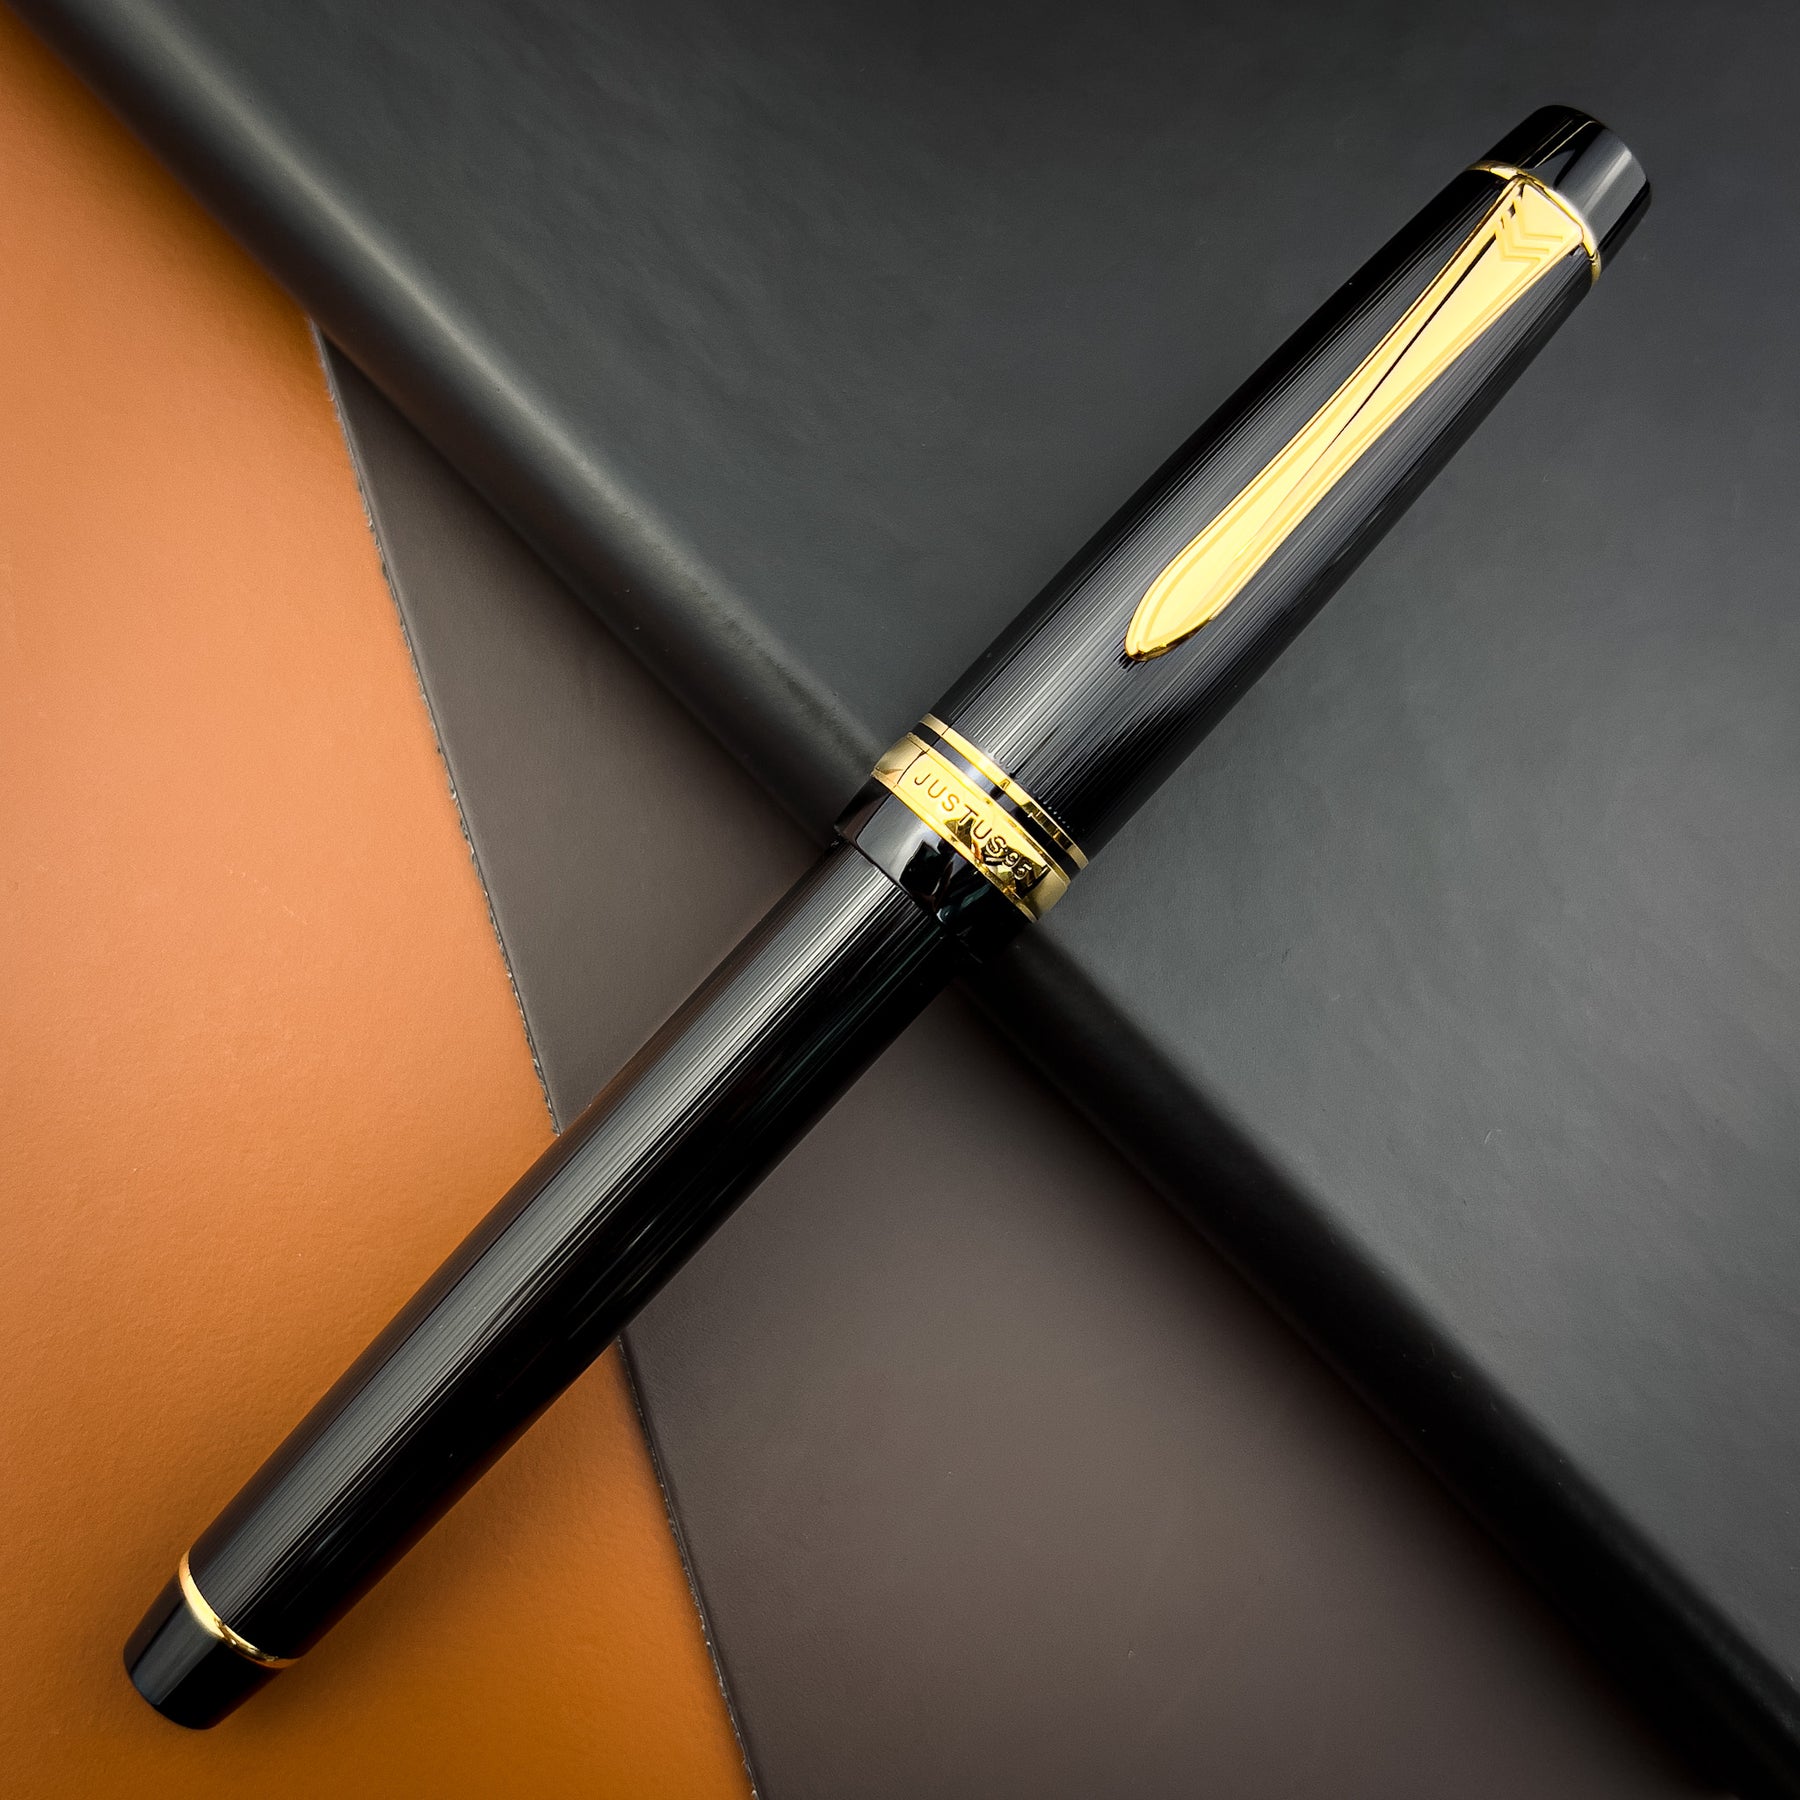 14-Kara　Accents　with　Justus　Pilot　Gold　Black　Pen　Resin　Fountain　95　Fine)　その他事務用品